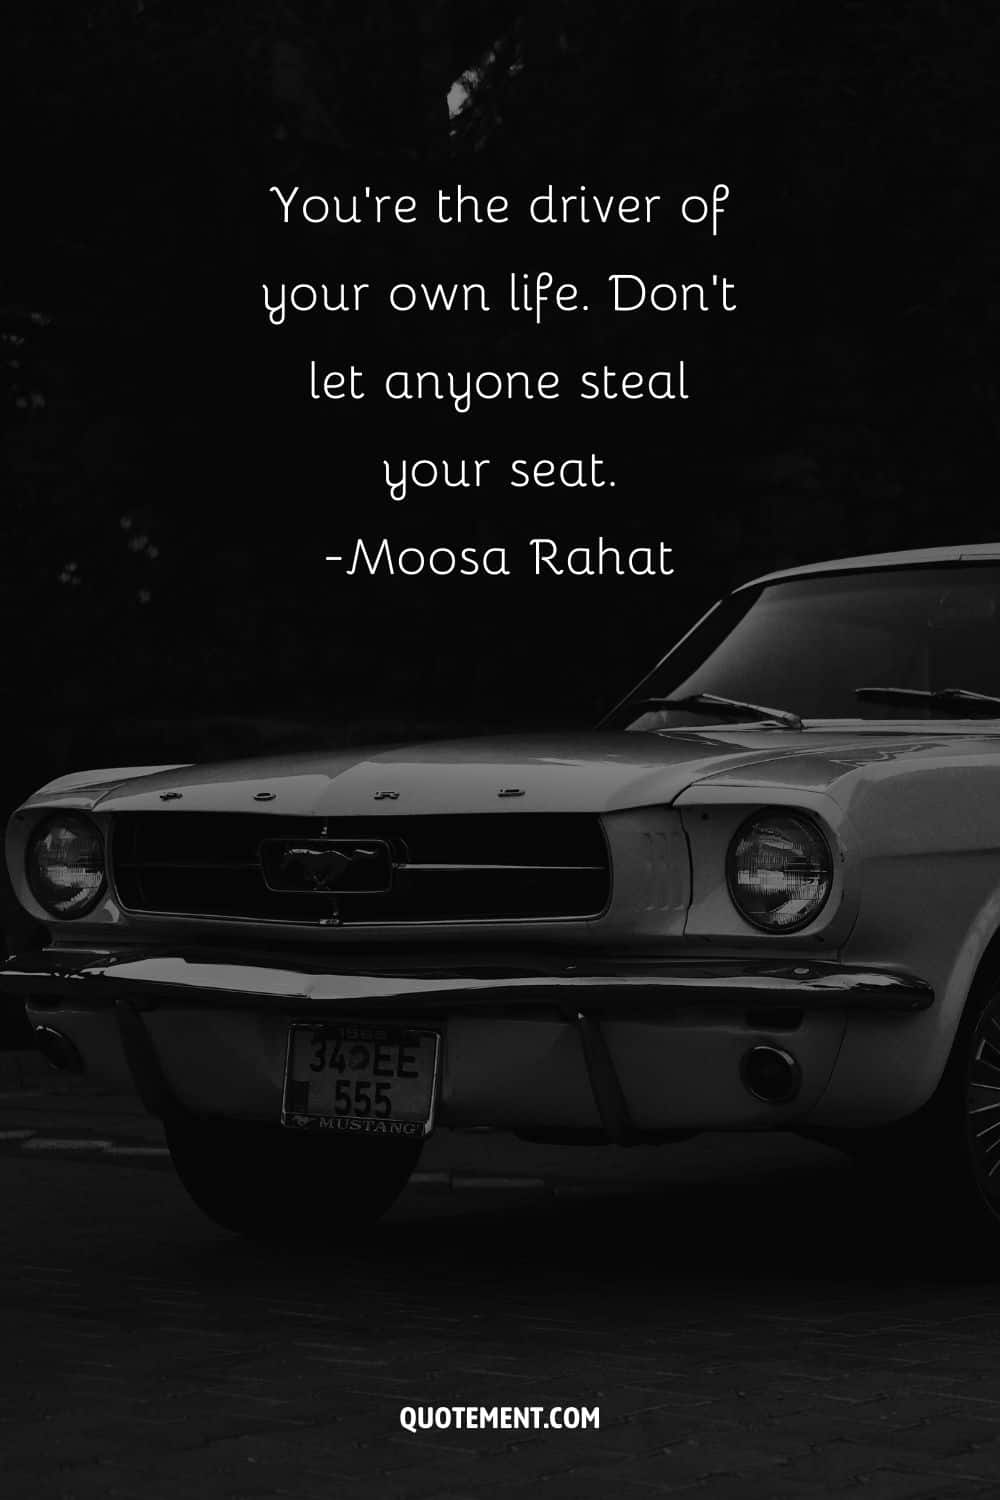 “You're the driver of your own life. Don't let anyone steal your seat.” ― Moosa Rahat